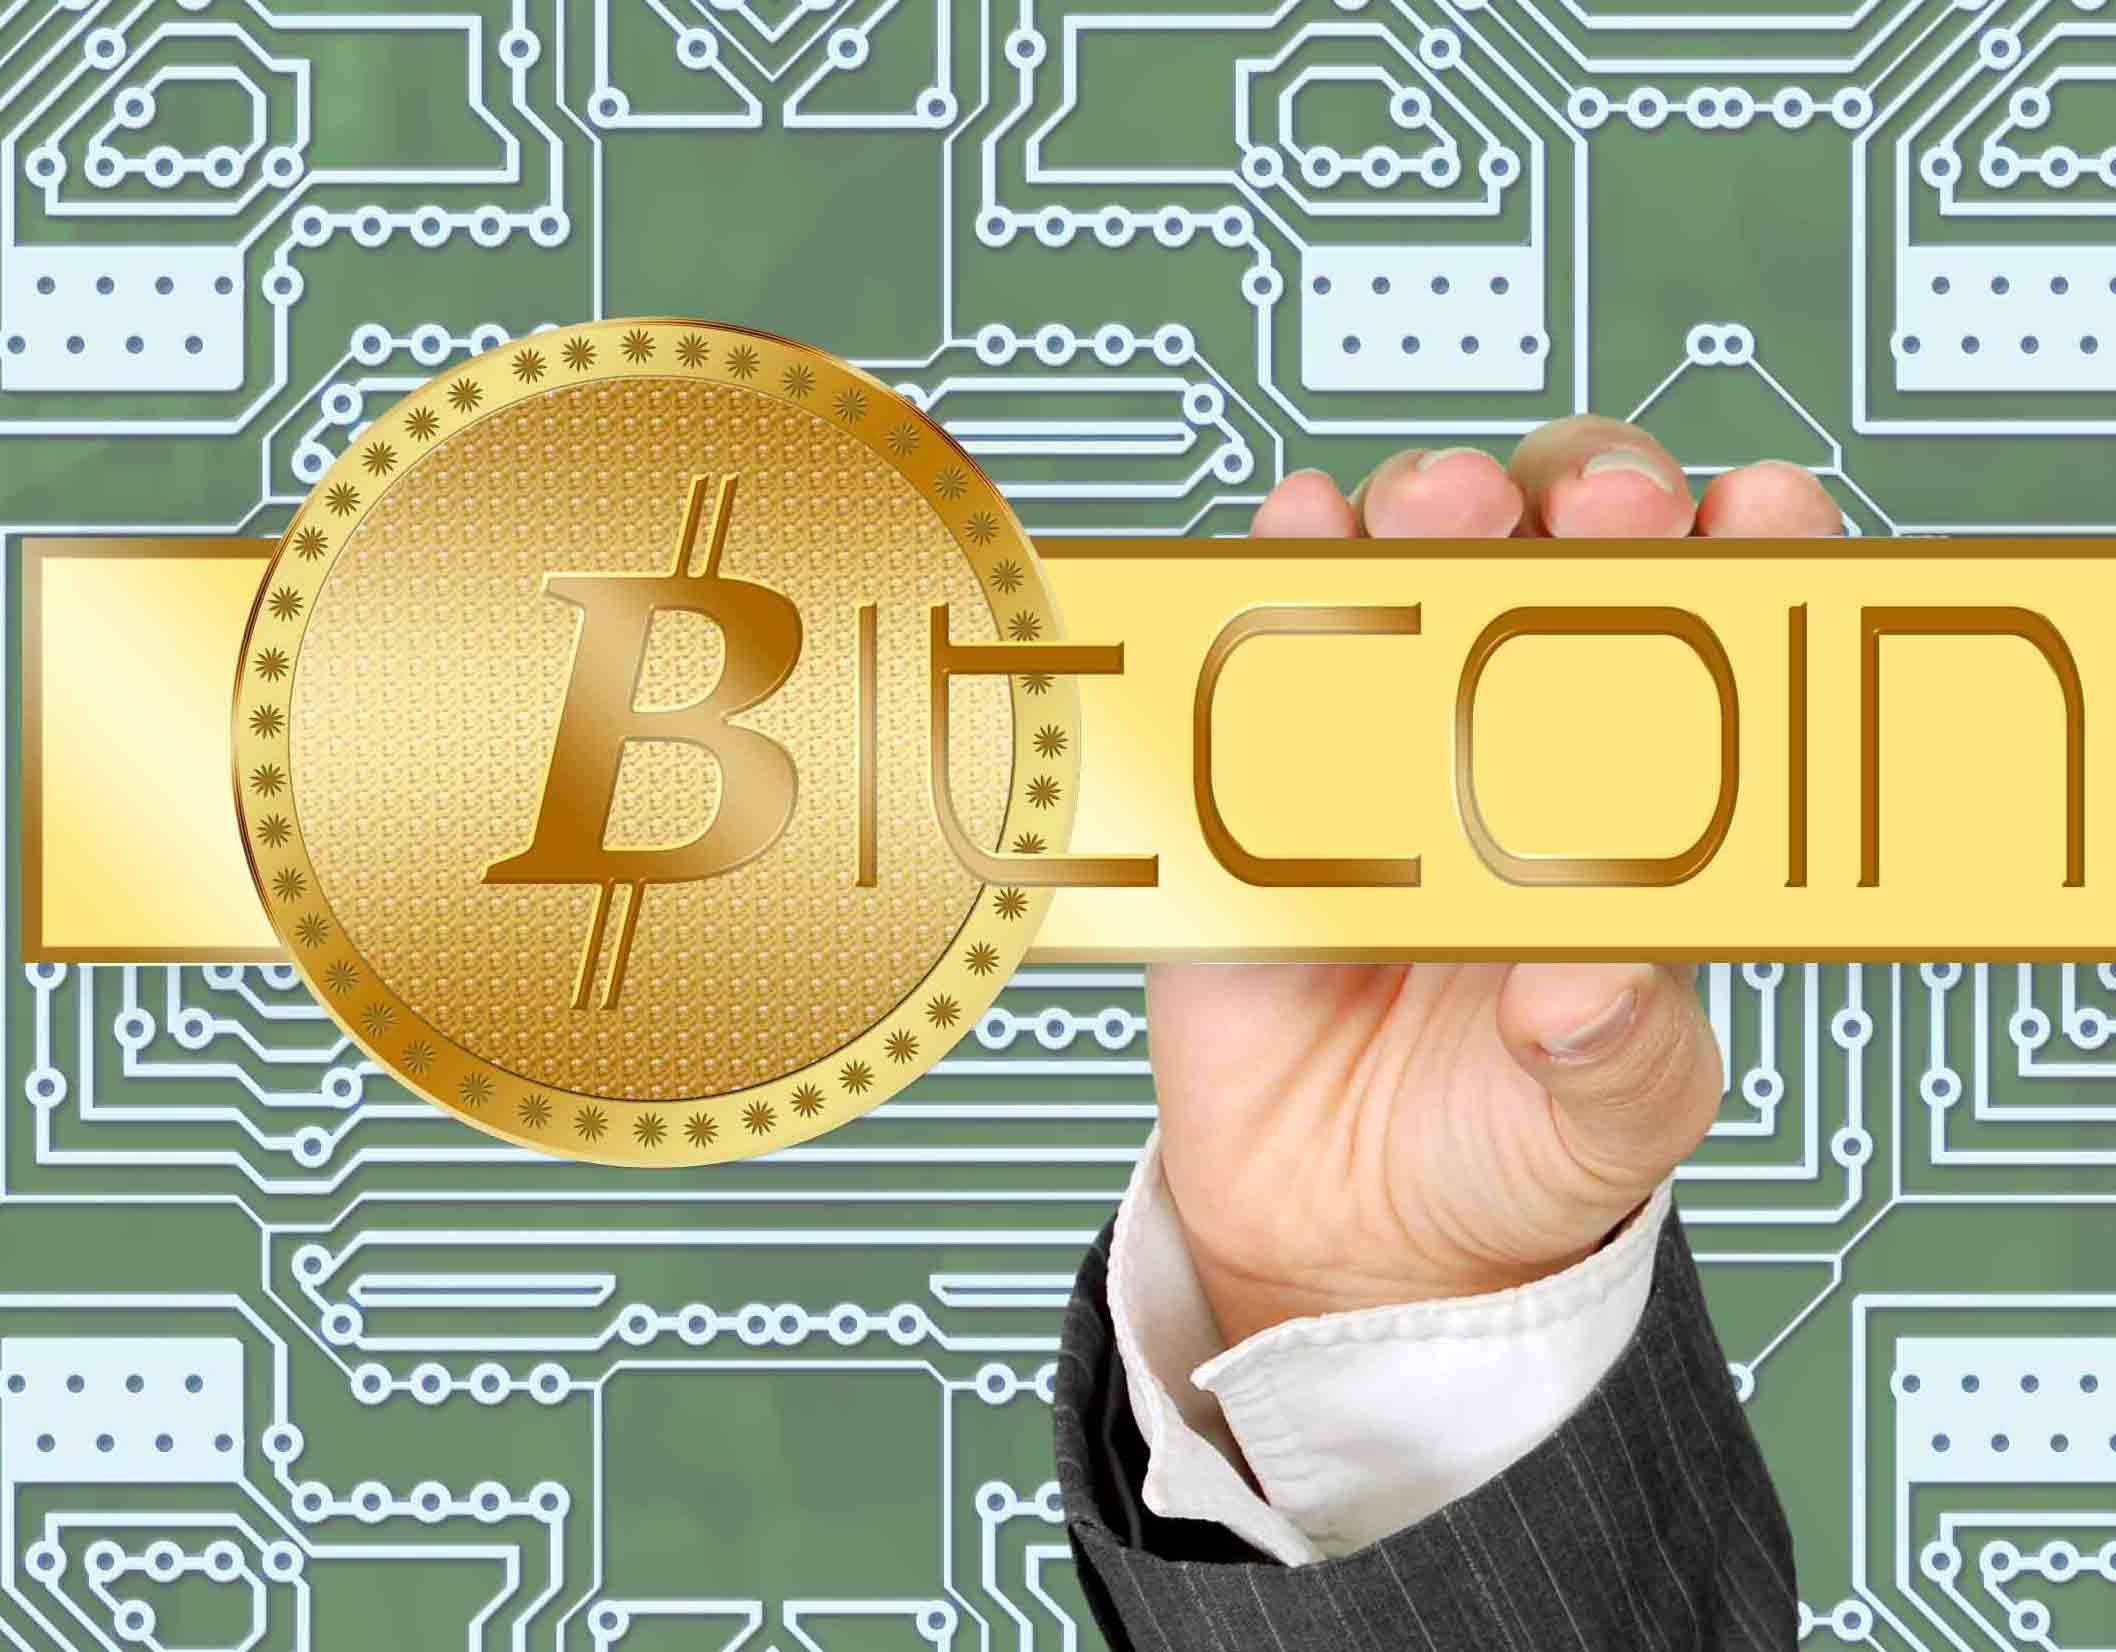 Bitcoin price increasing day by day